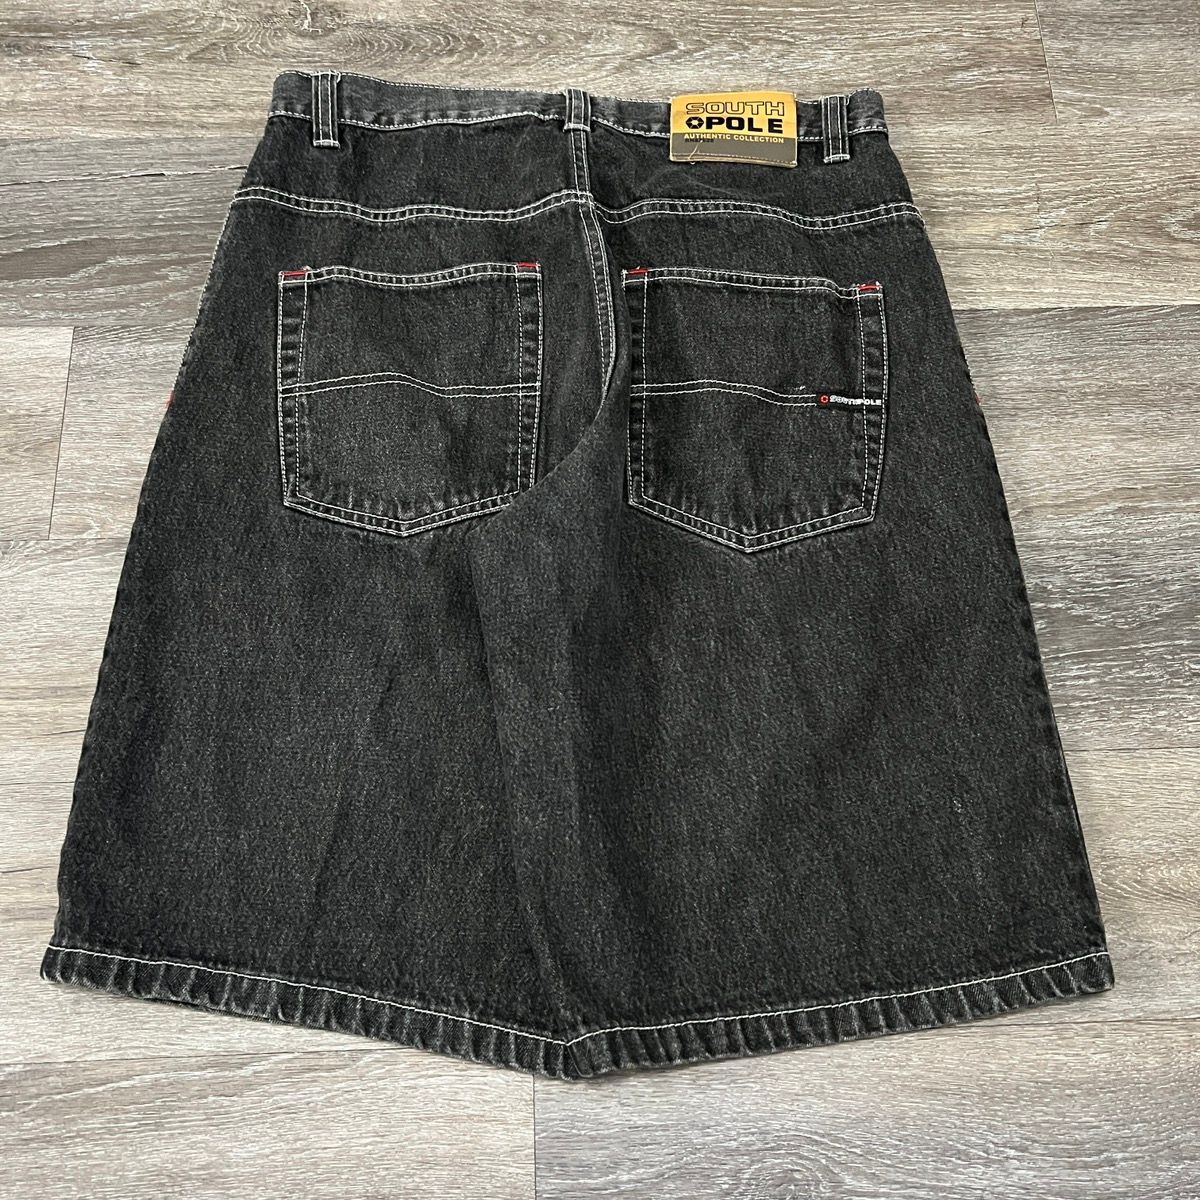 Pre-owned Jnco X Southpole Vintage Y2k Southpole Baggy Wide Leg Black Shorts Jnco Style